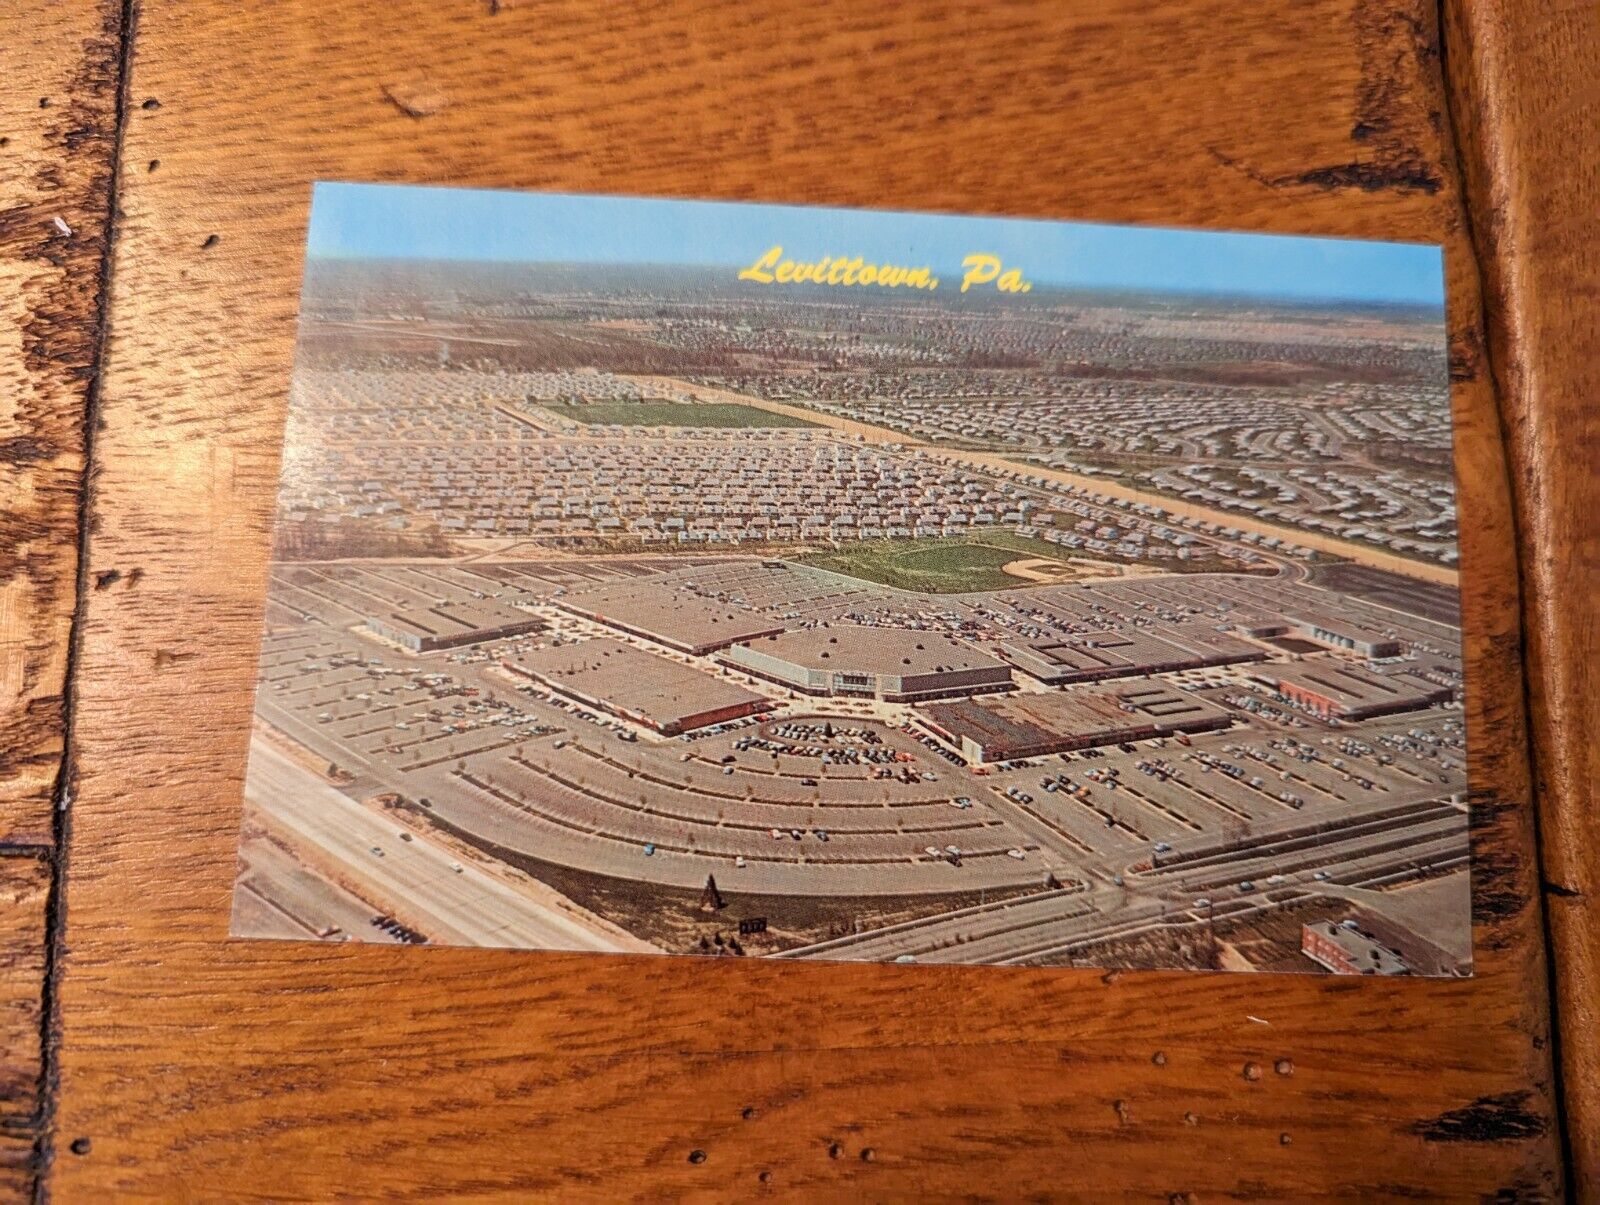 1958 PA Levittown AERIAL VIEW Shopping FIRST MODEL SUBURB in US postcard D34